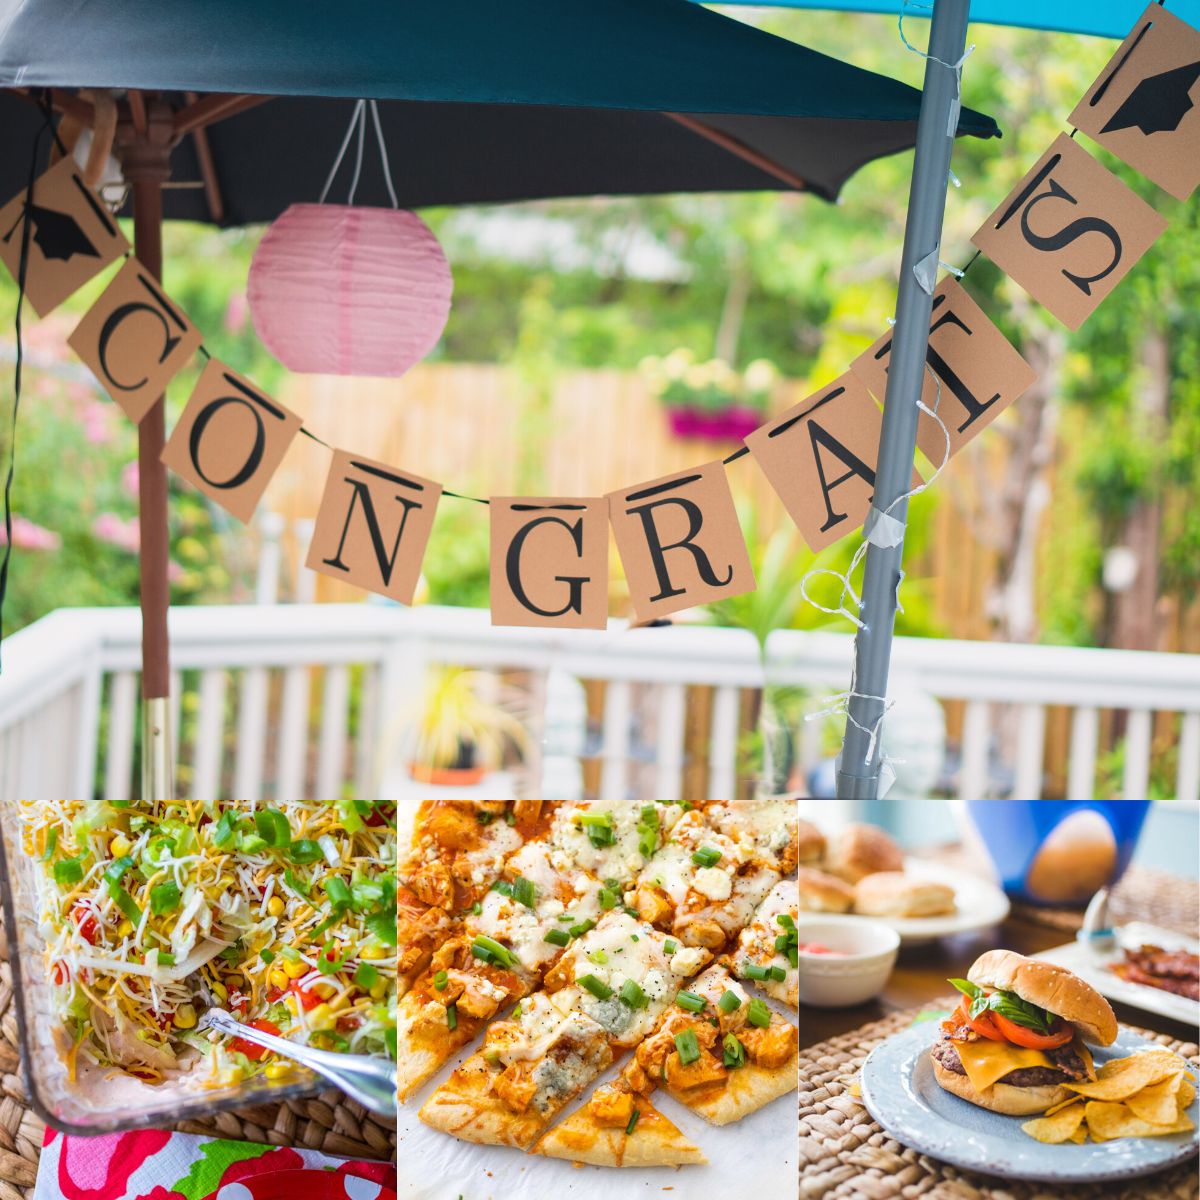 A photo collage shows several recipes that could be served for a backyard party for a college graduation.